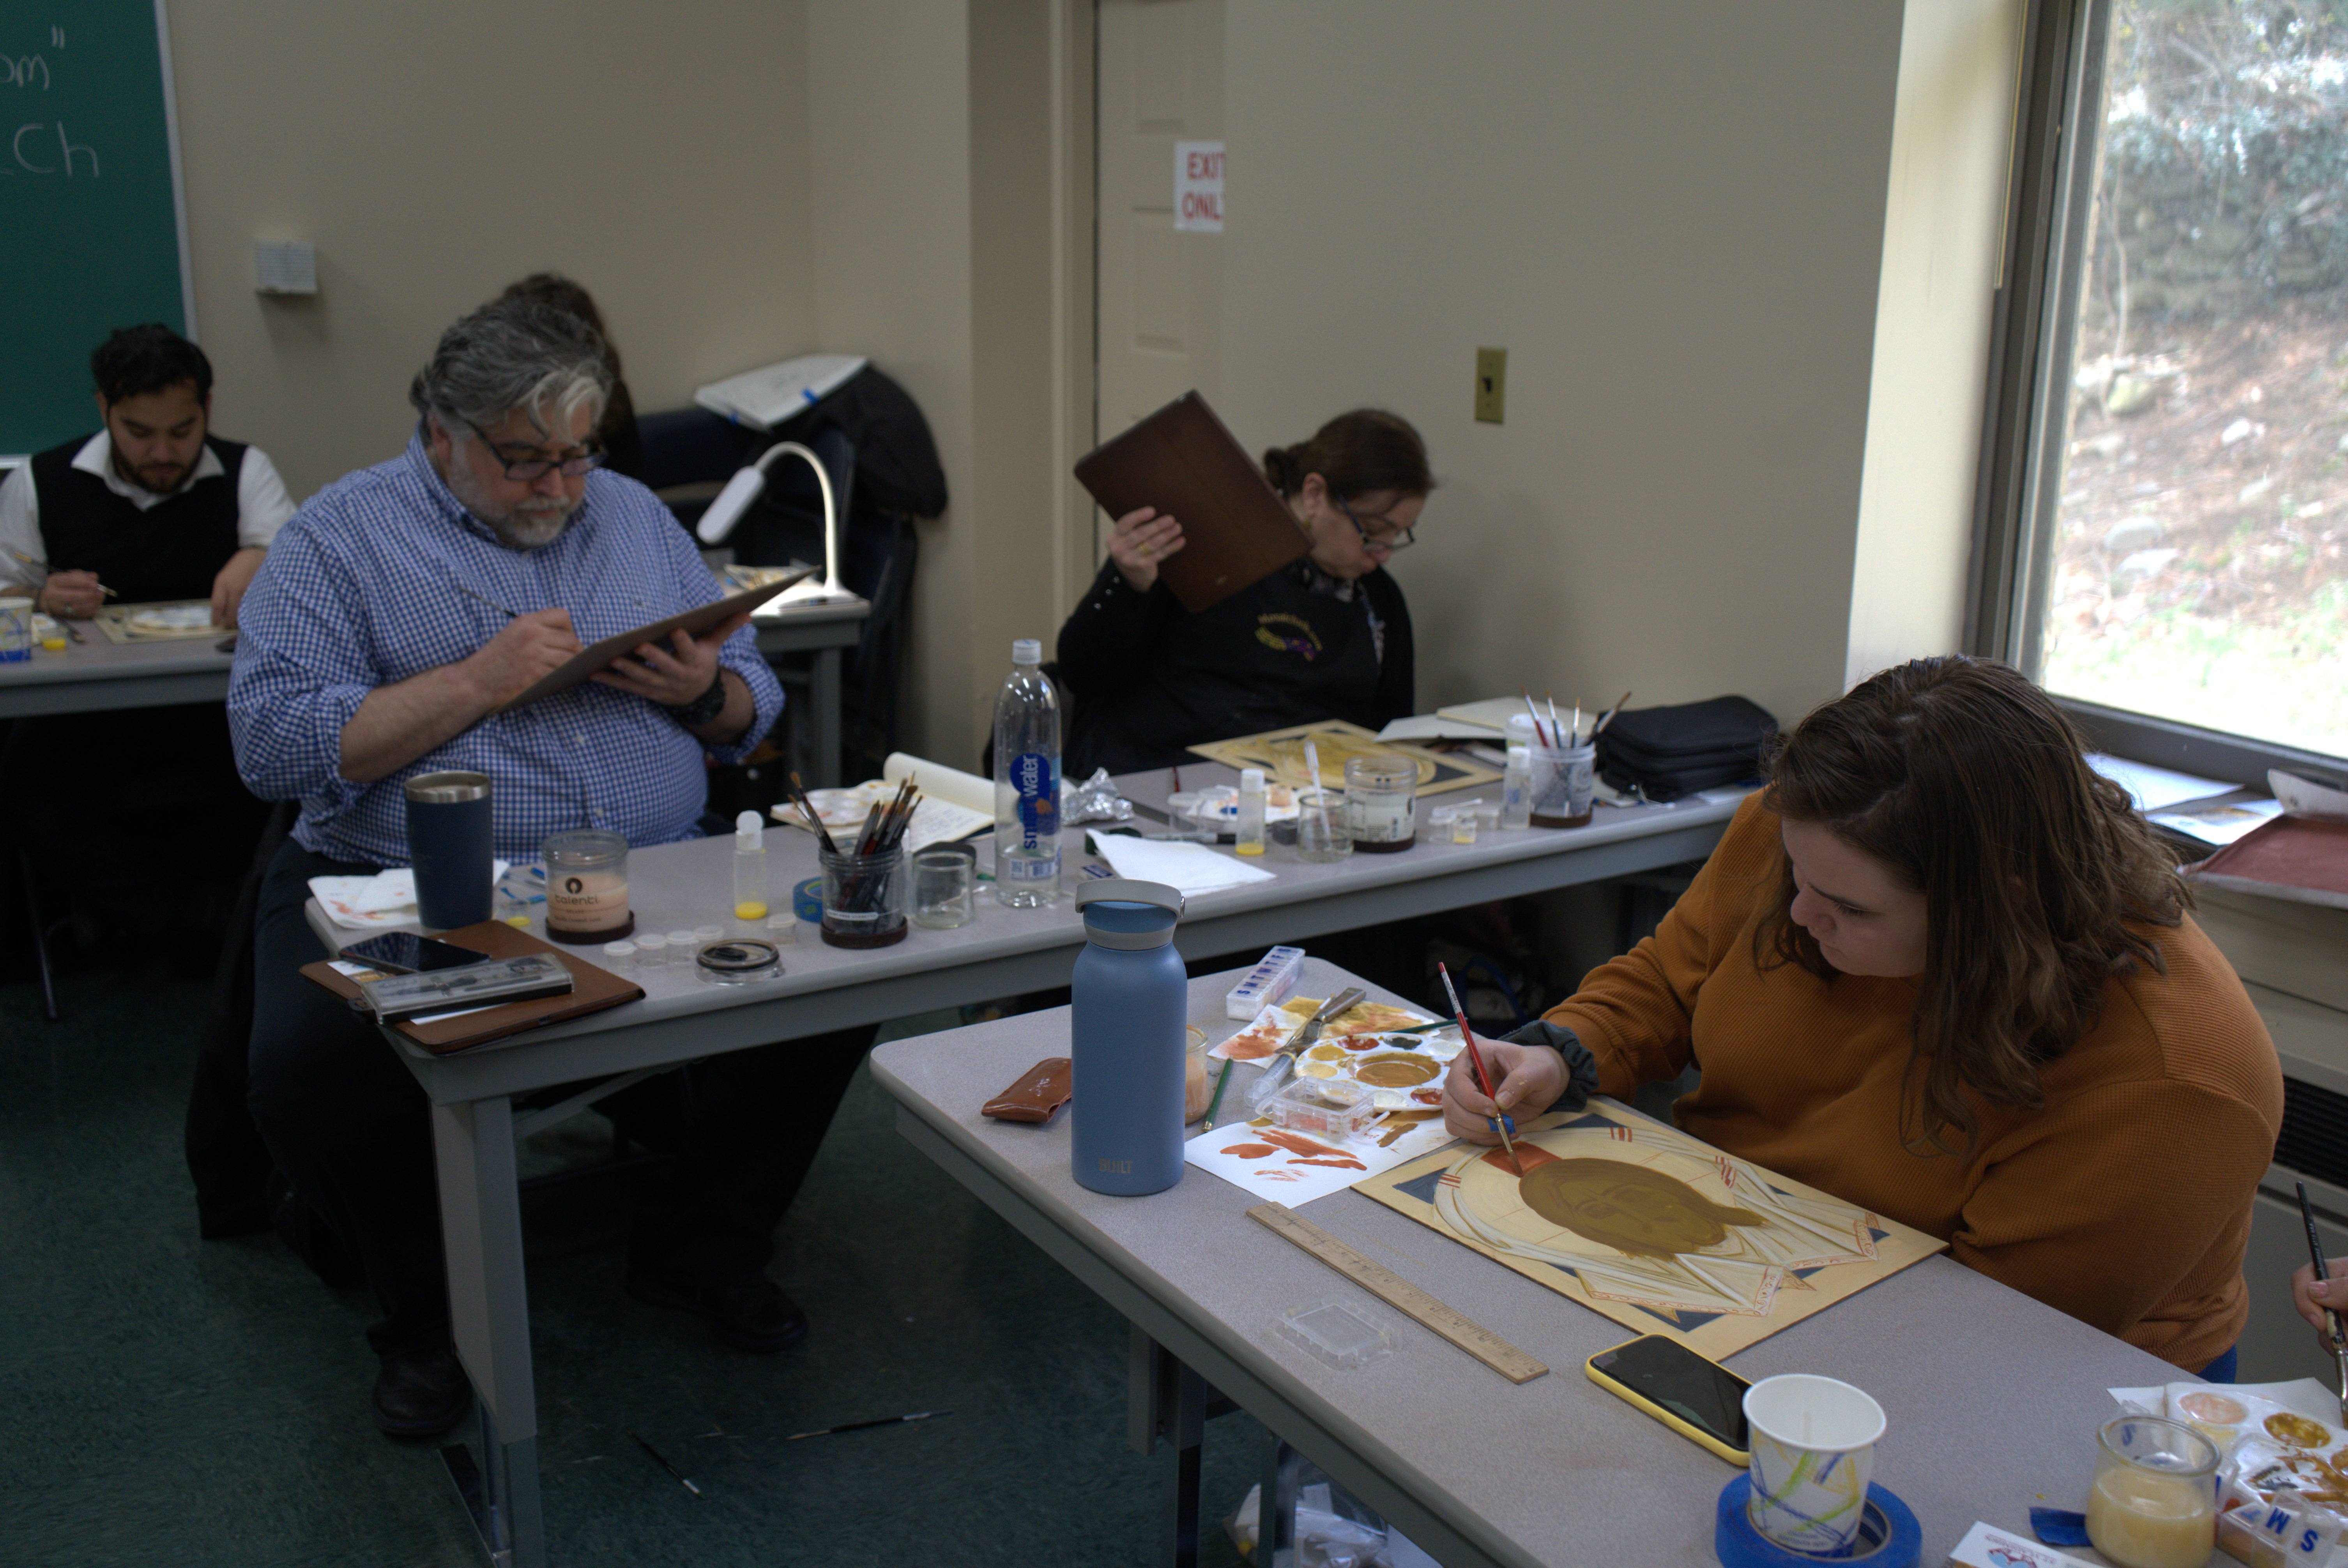 Male and female students work on projects during the workshop